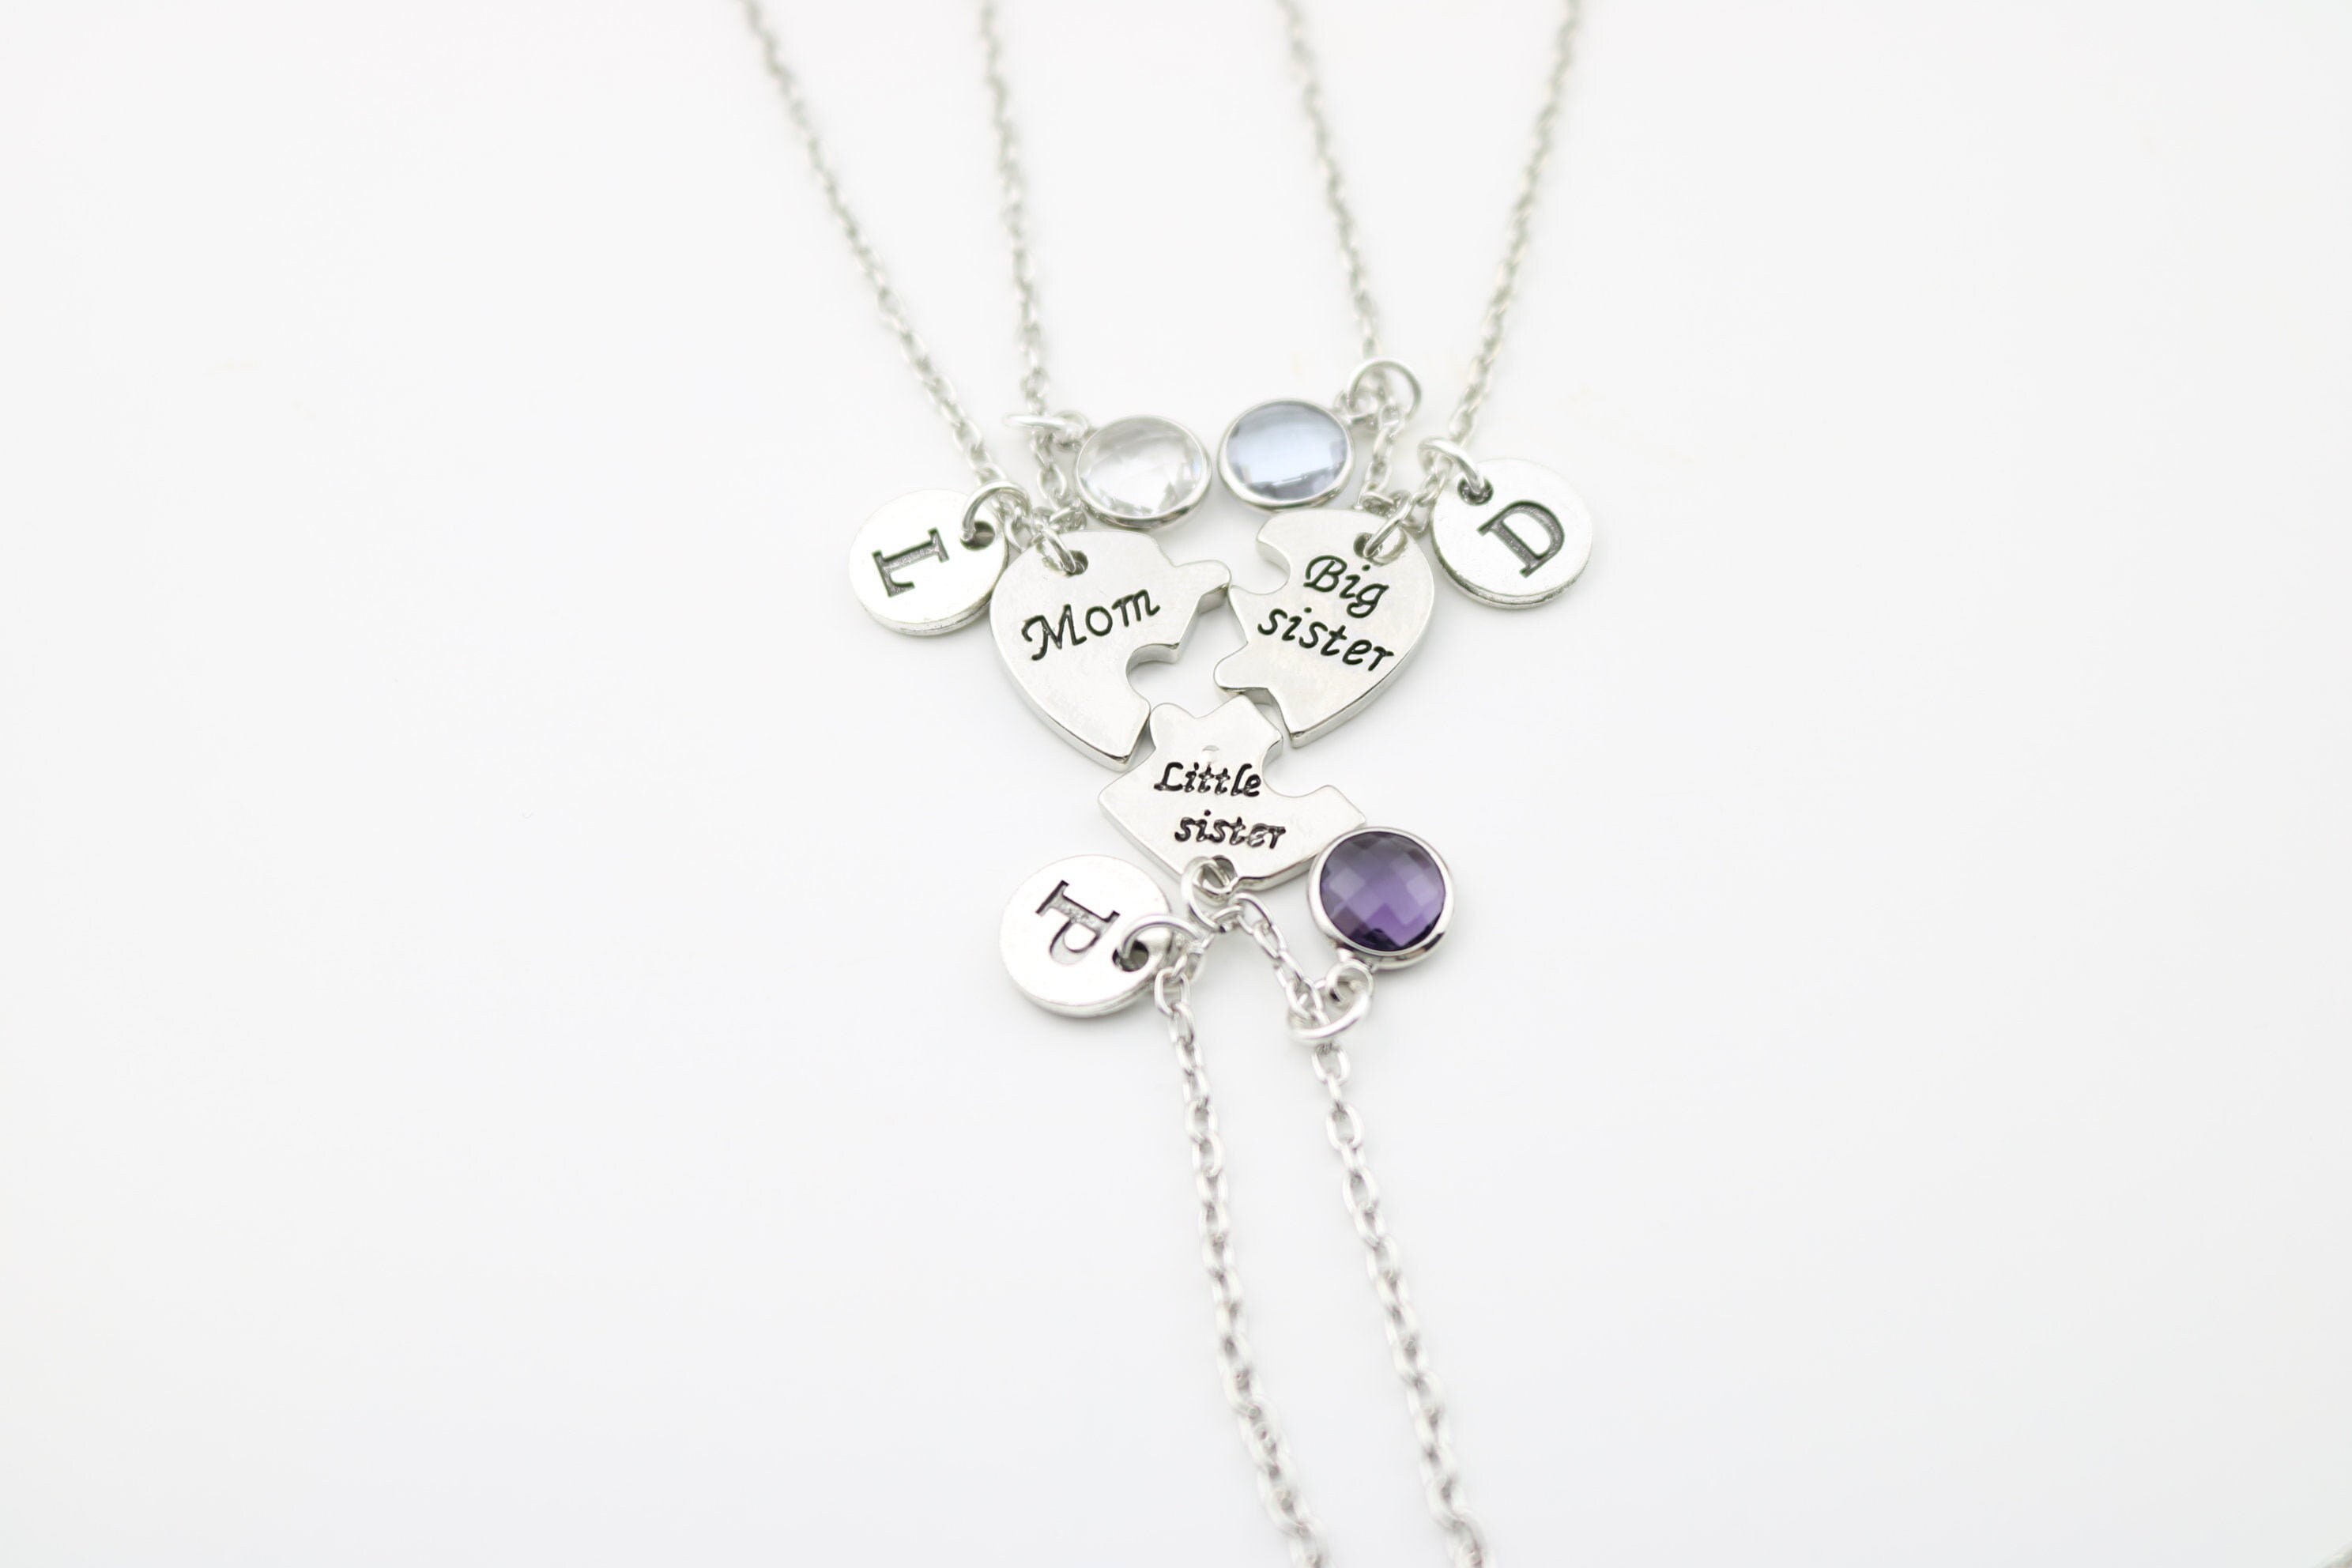 Lovecryst Family Family Pendant Necklace Set For Girls, Big Sisters, Little  Mom Perfect BFF Friendship Jewelry Gift From Yanzhoucheng, $12.02 |  DHgate.Com